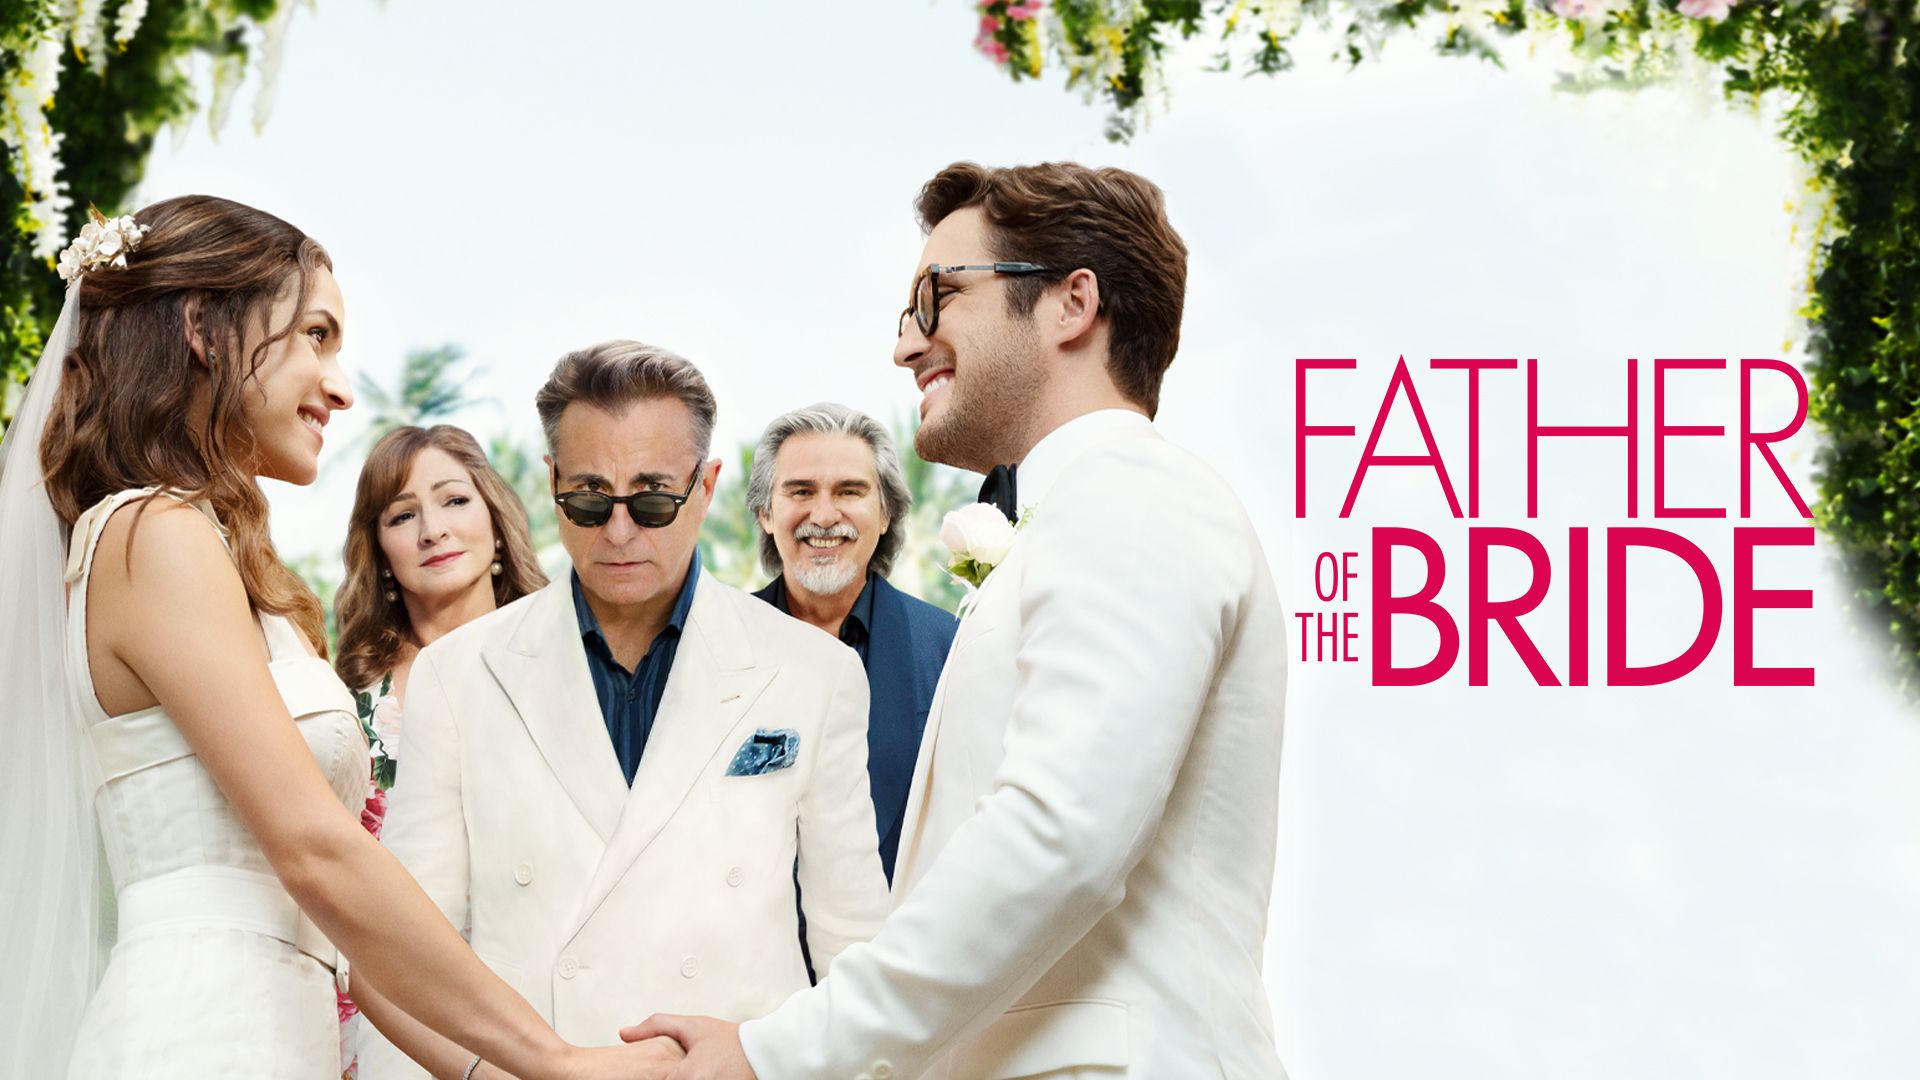 35-facts-about-the-movie-father-of-the-bride